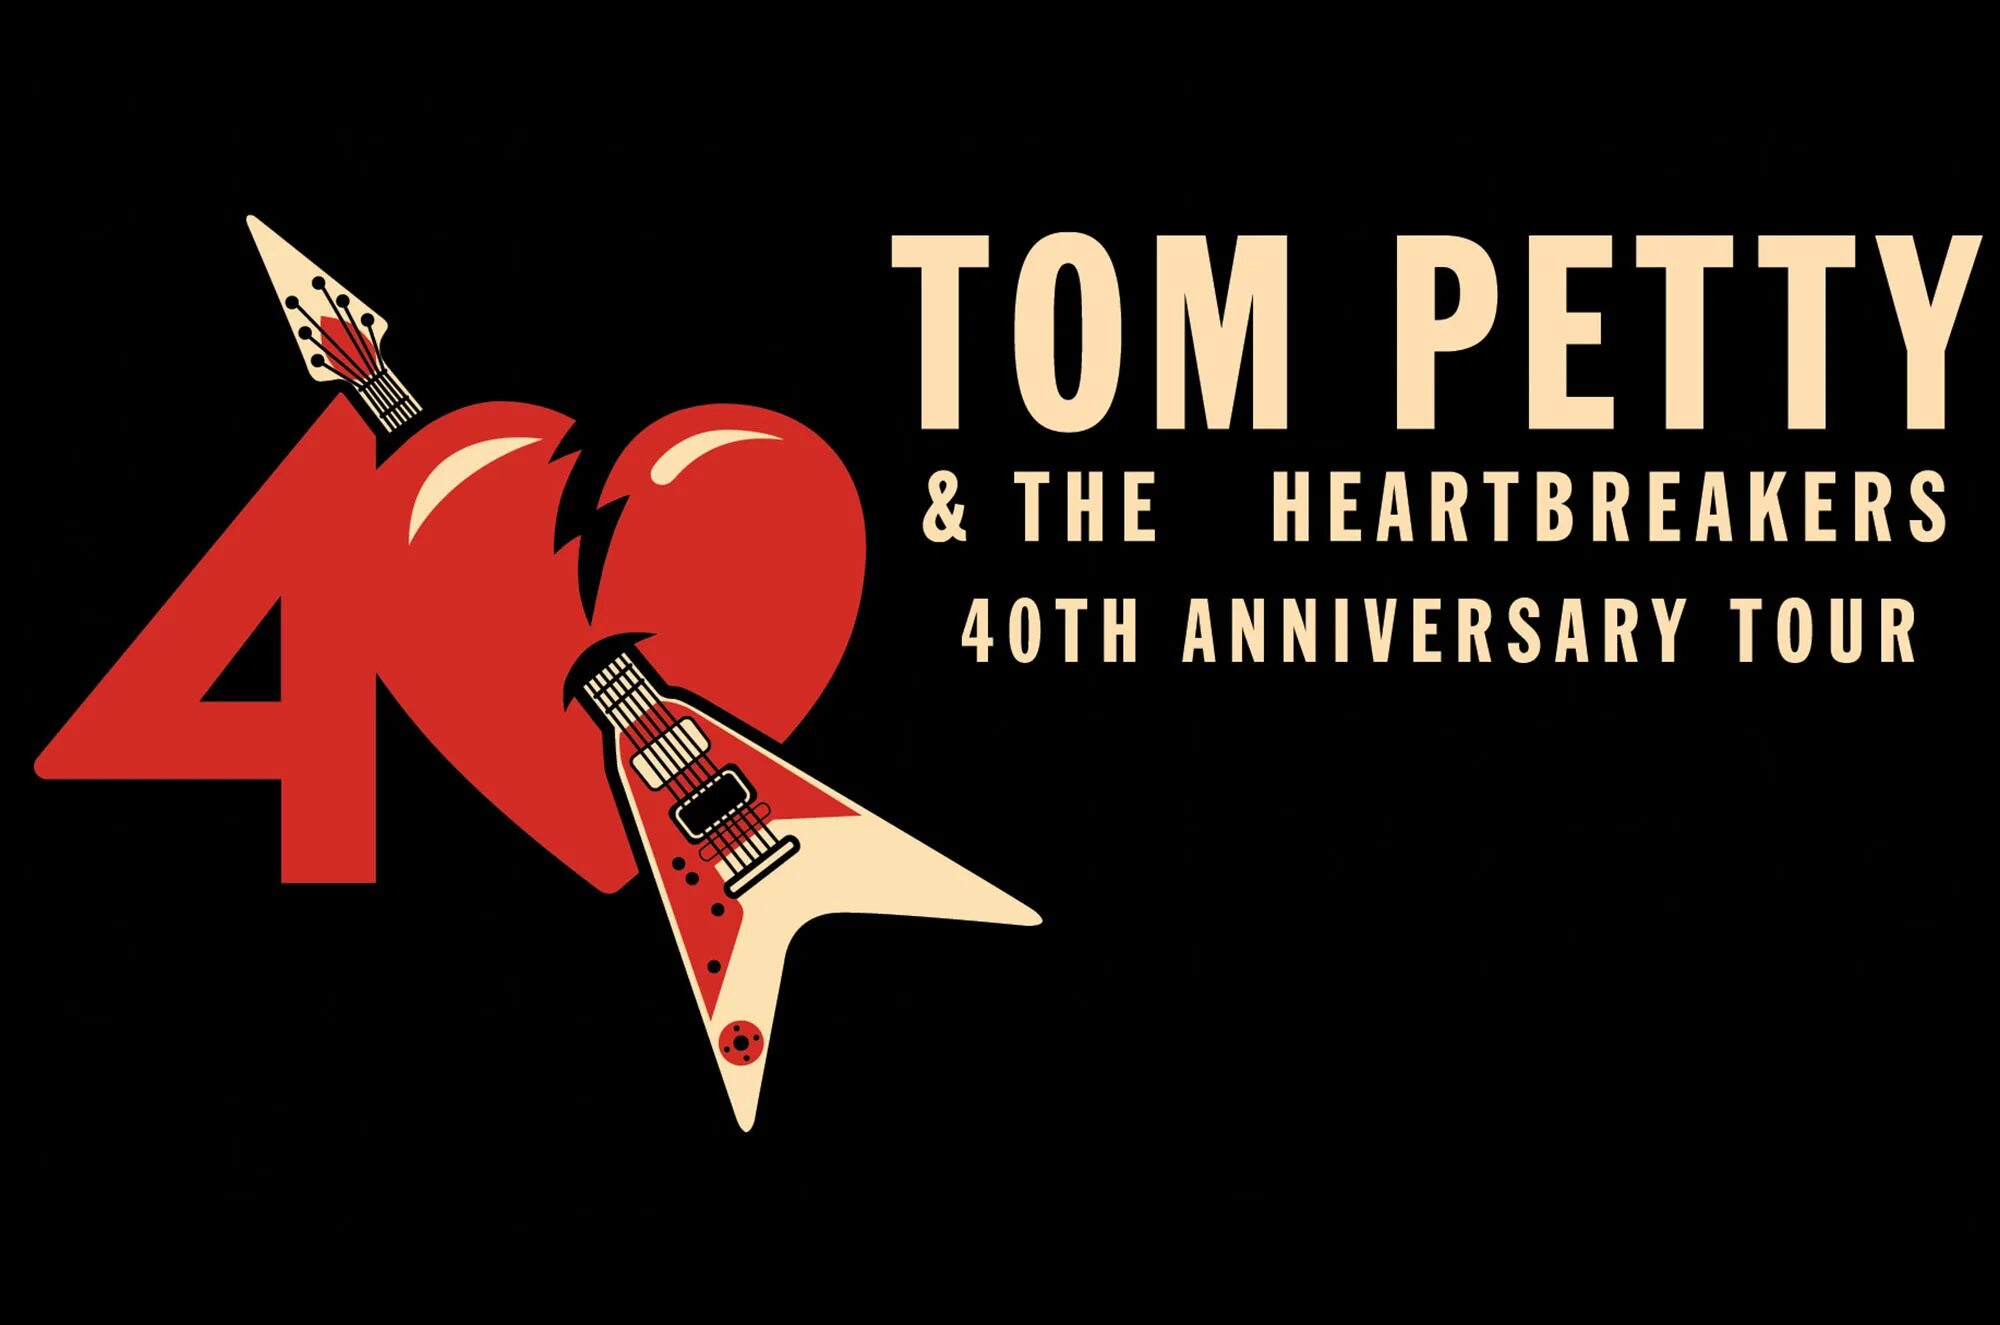 Threesome 2022. Tom Petty and the Heartbreakers. Tom Petty and the Heartbreakers 1976. Tom Petty and the Heartbreakers logo. Heartbreakers группа.